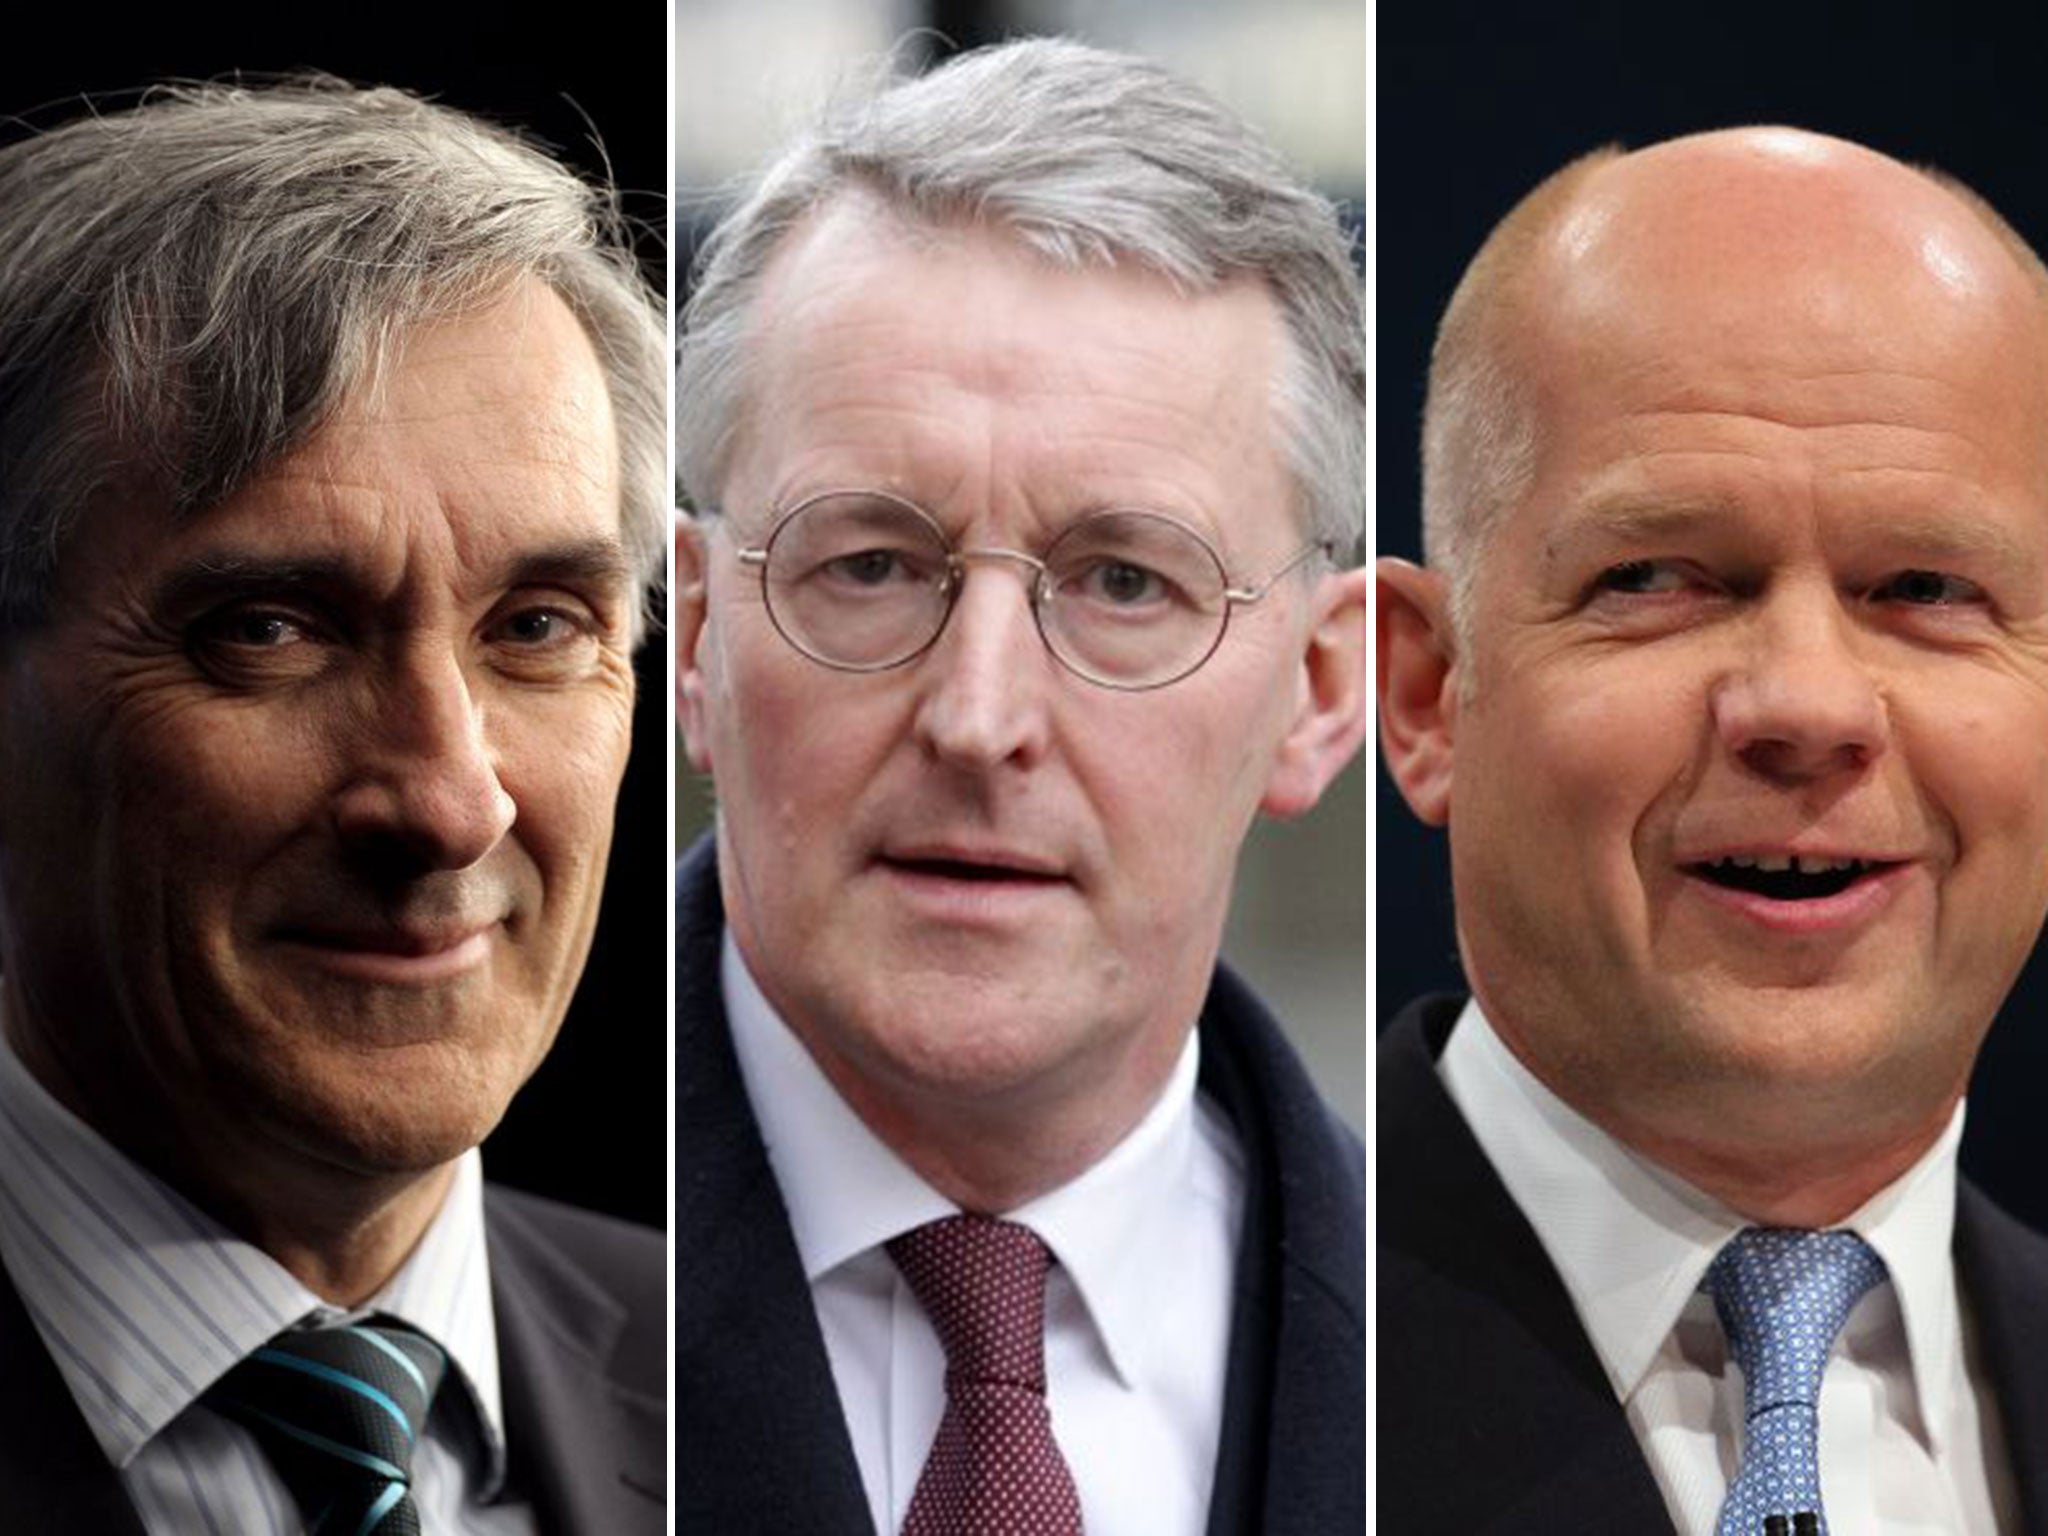 John Redwood, Hilary Benn, and William Hague all differ over what should happen next